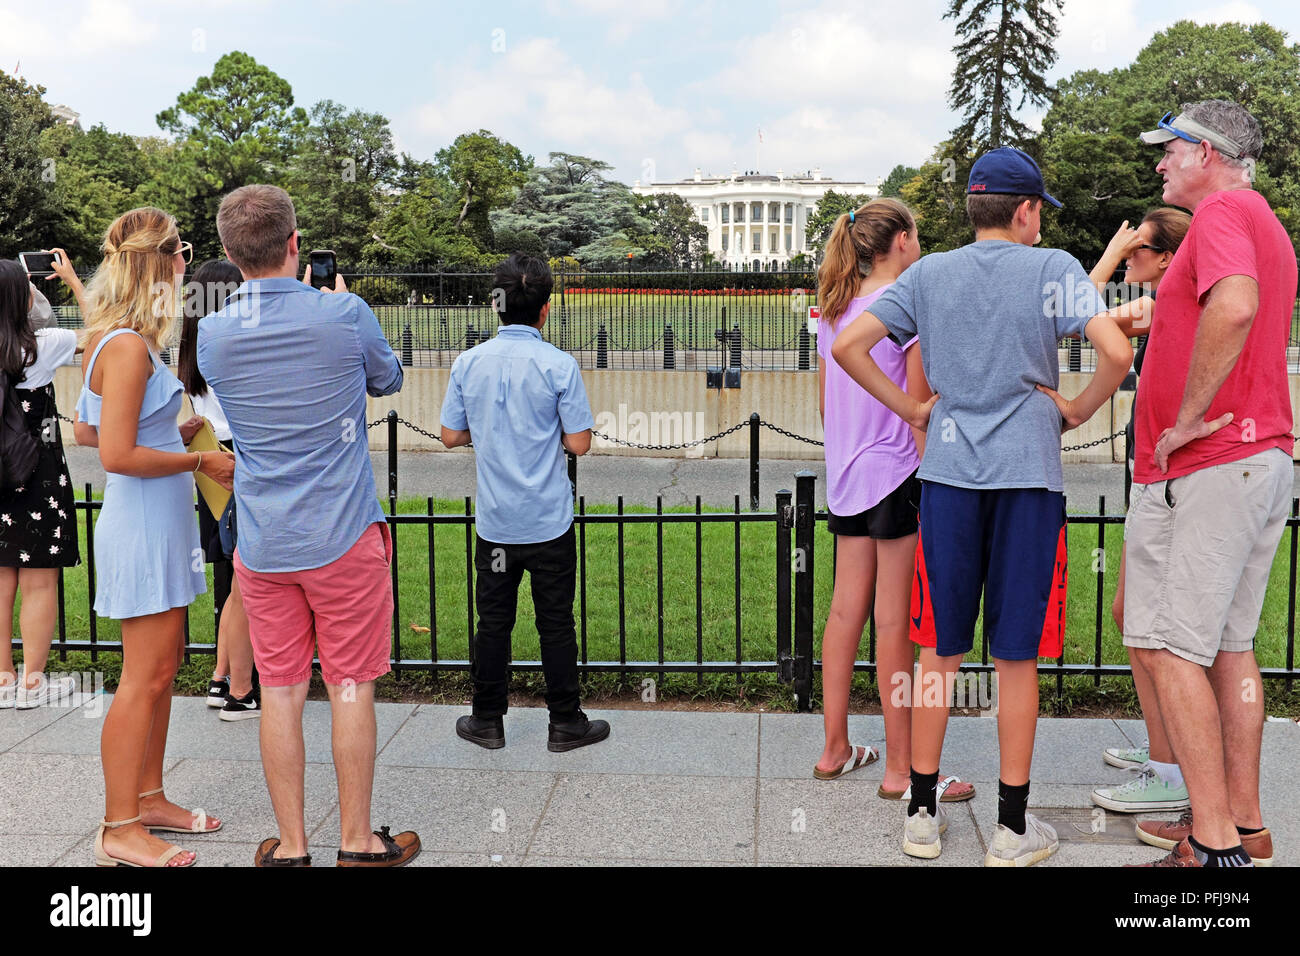 Summer tourists stand and take photos of the distant U.S. White House from behind the security barriers in Washington D.C. USA. Stock Photo